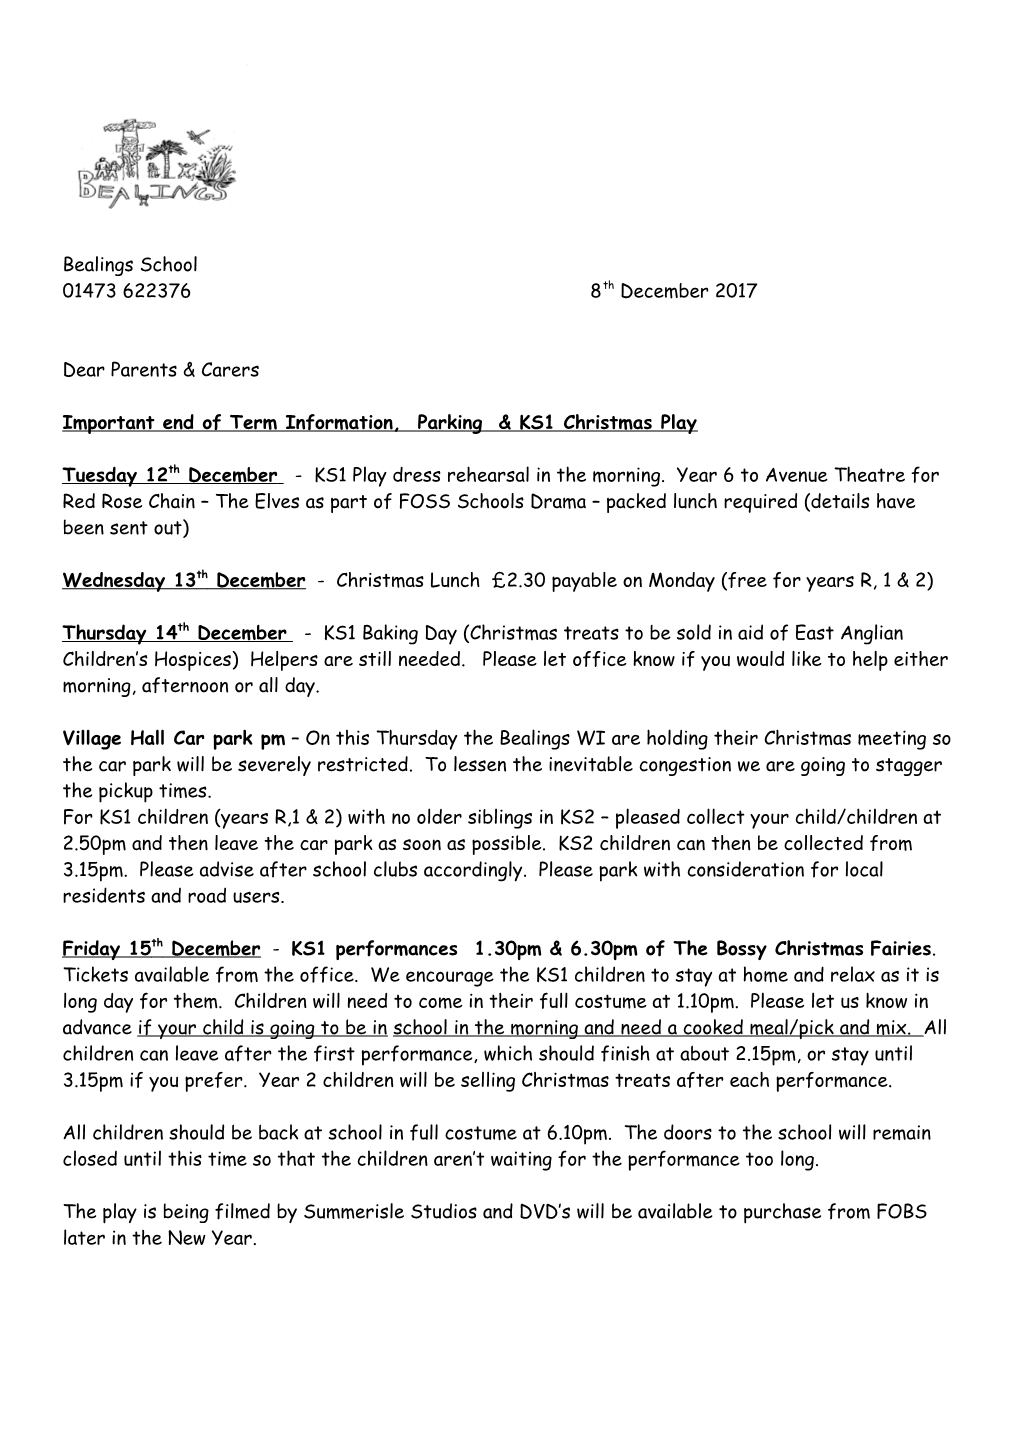 Important End of Term Information, Parking & KS1 Christmas Play